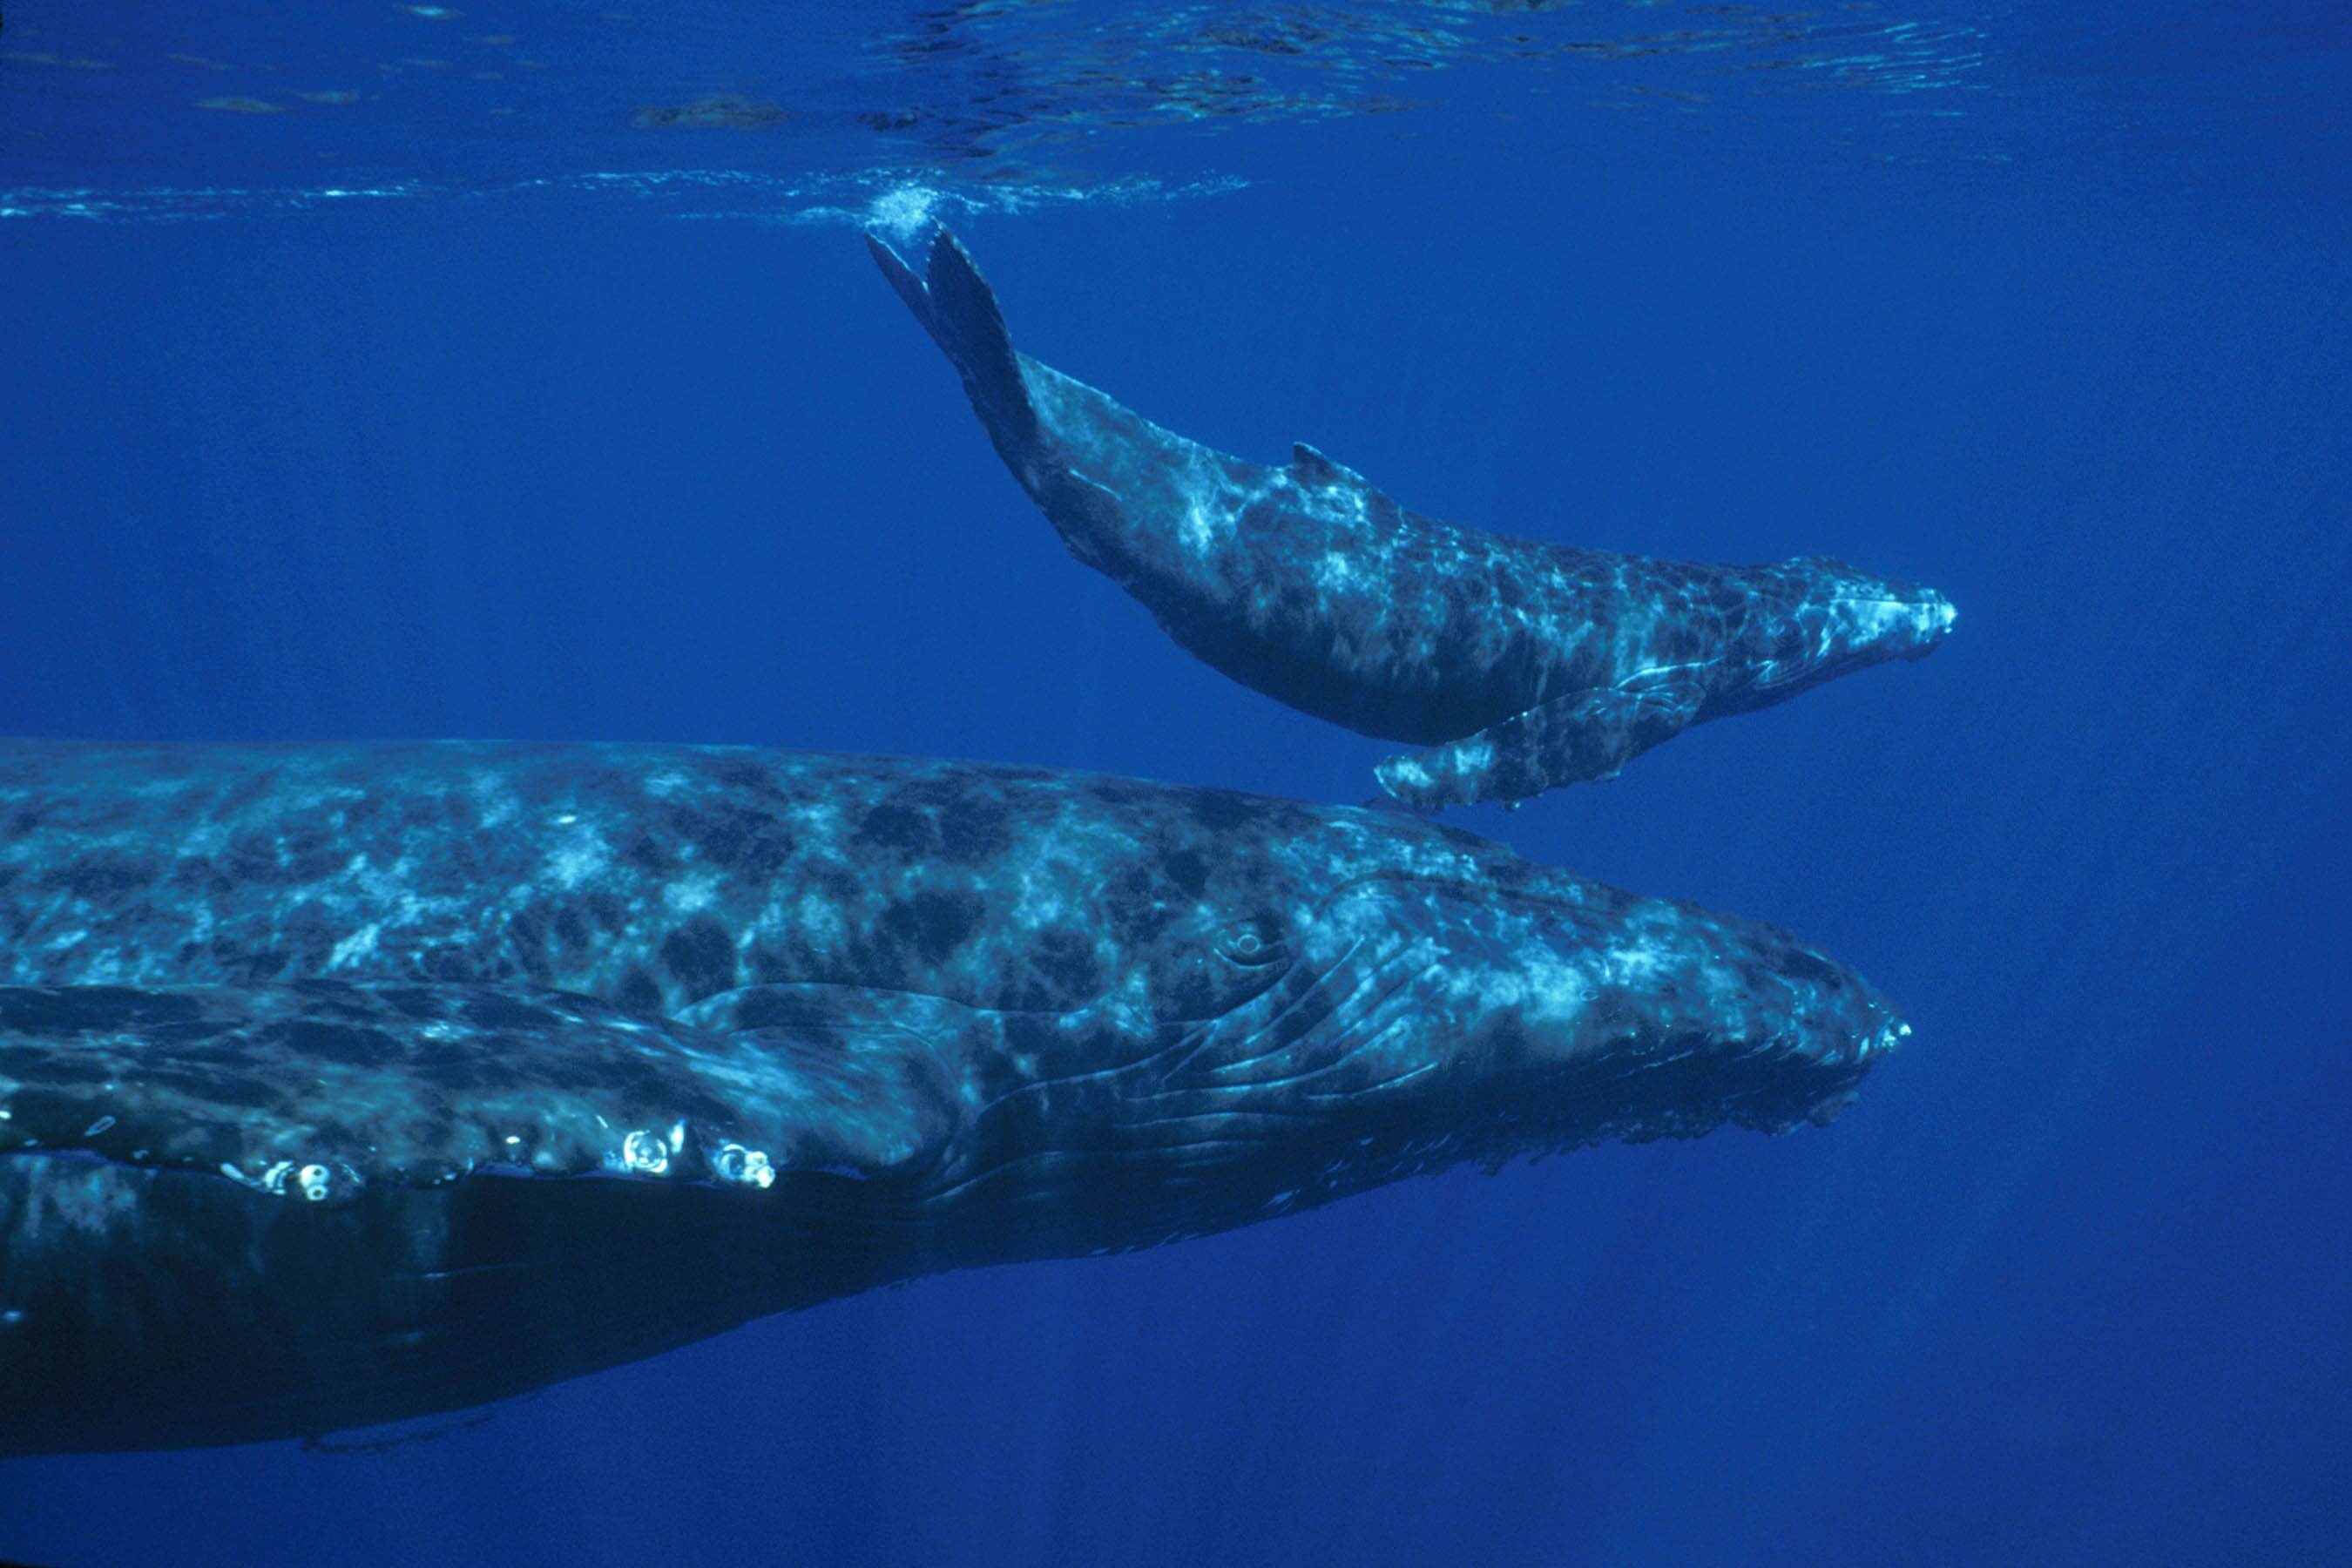 A humpback whale and its calf image